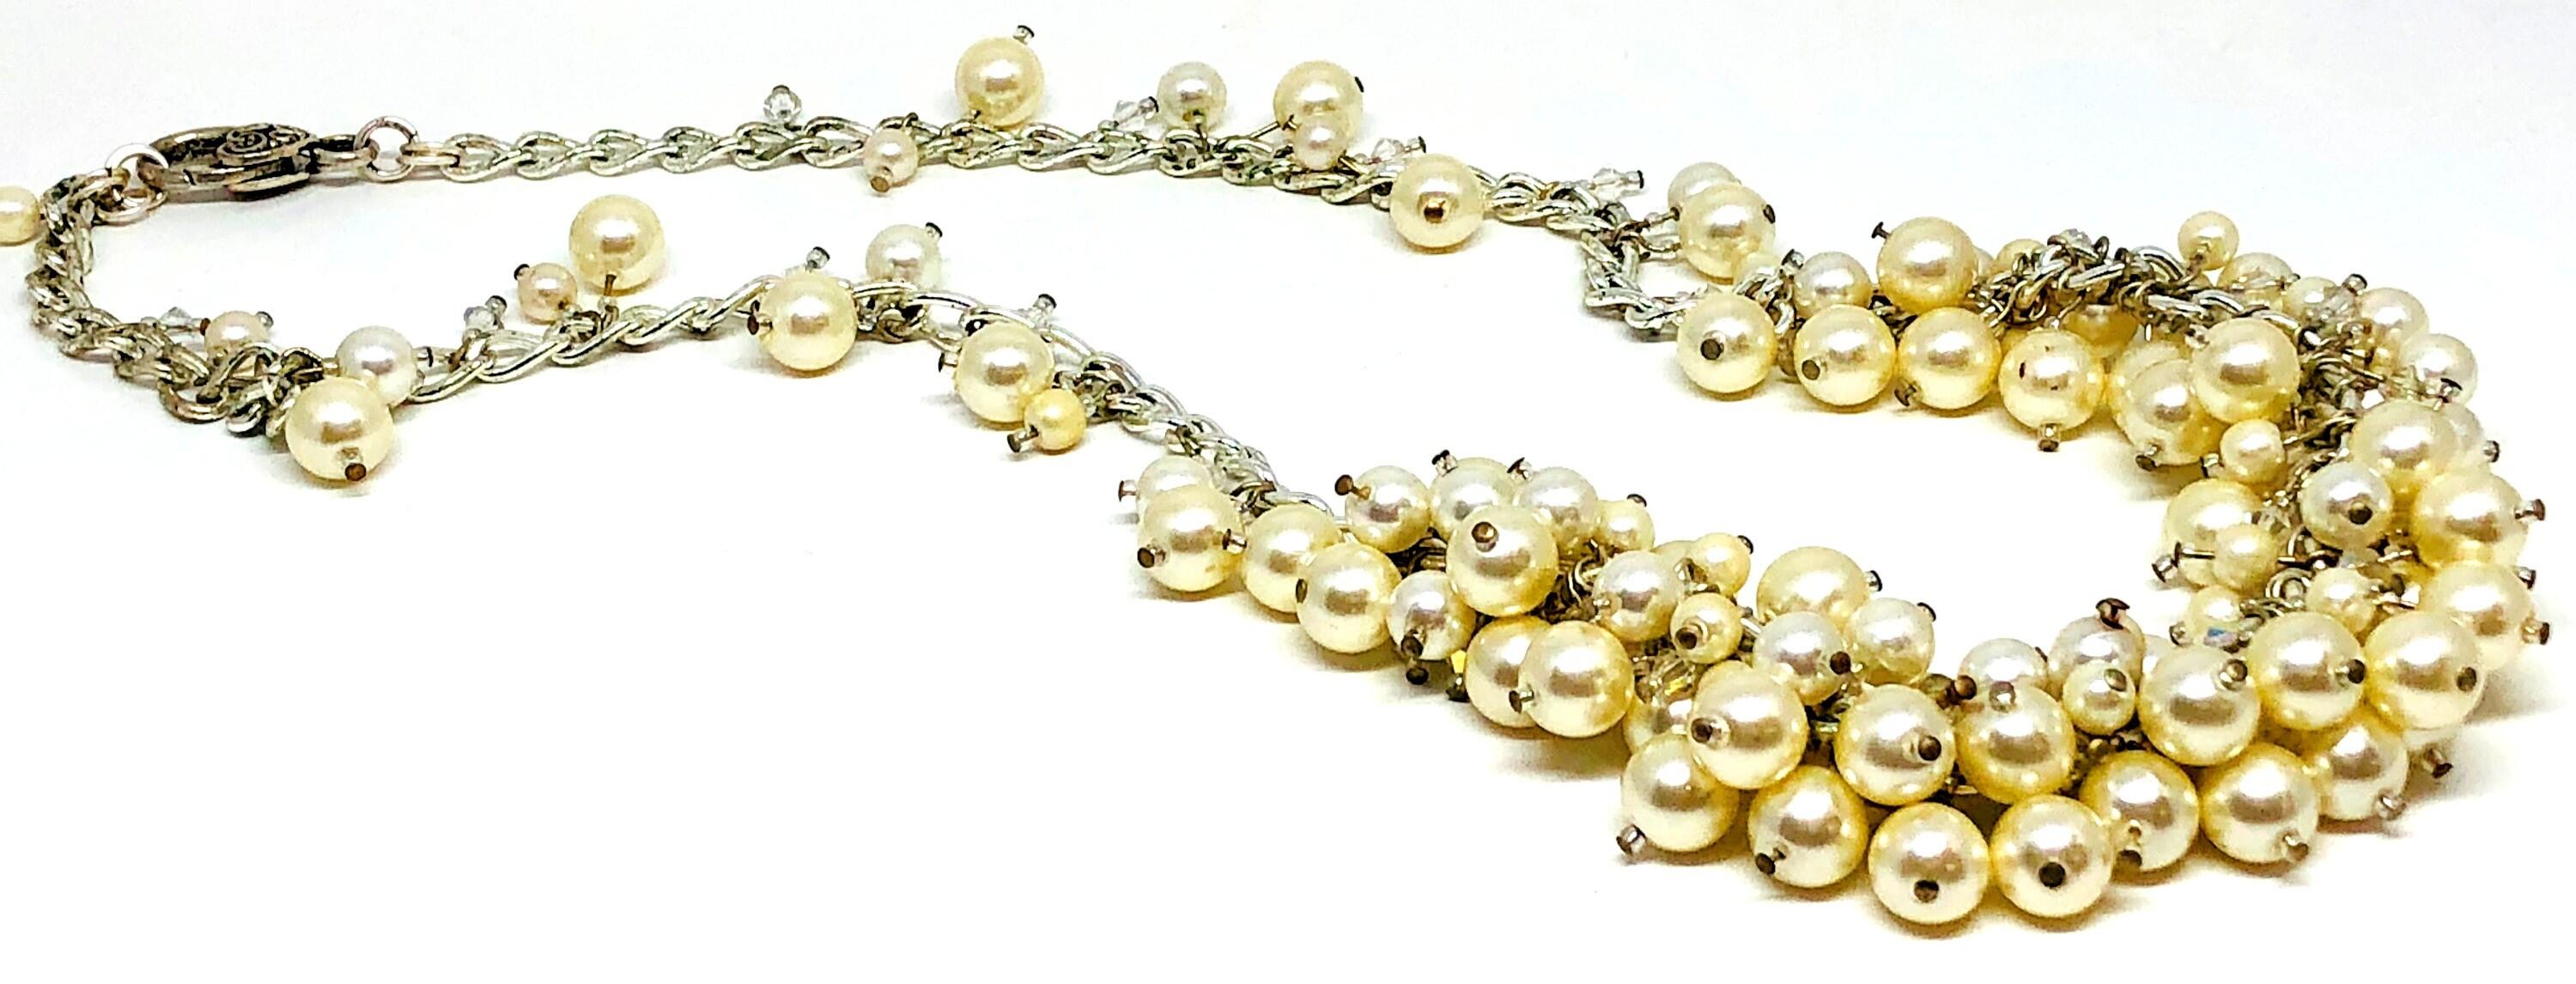 Handmade Pearl Cluster and Silver Chain Necklace